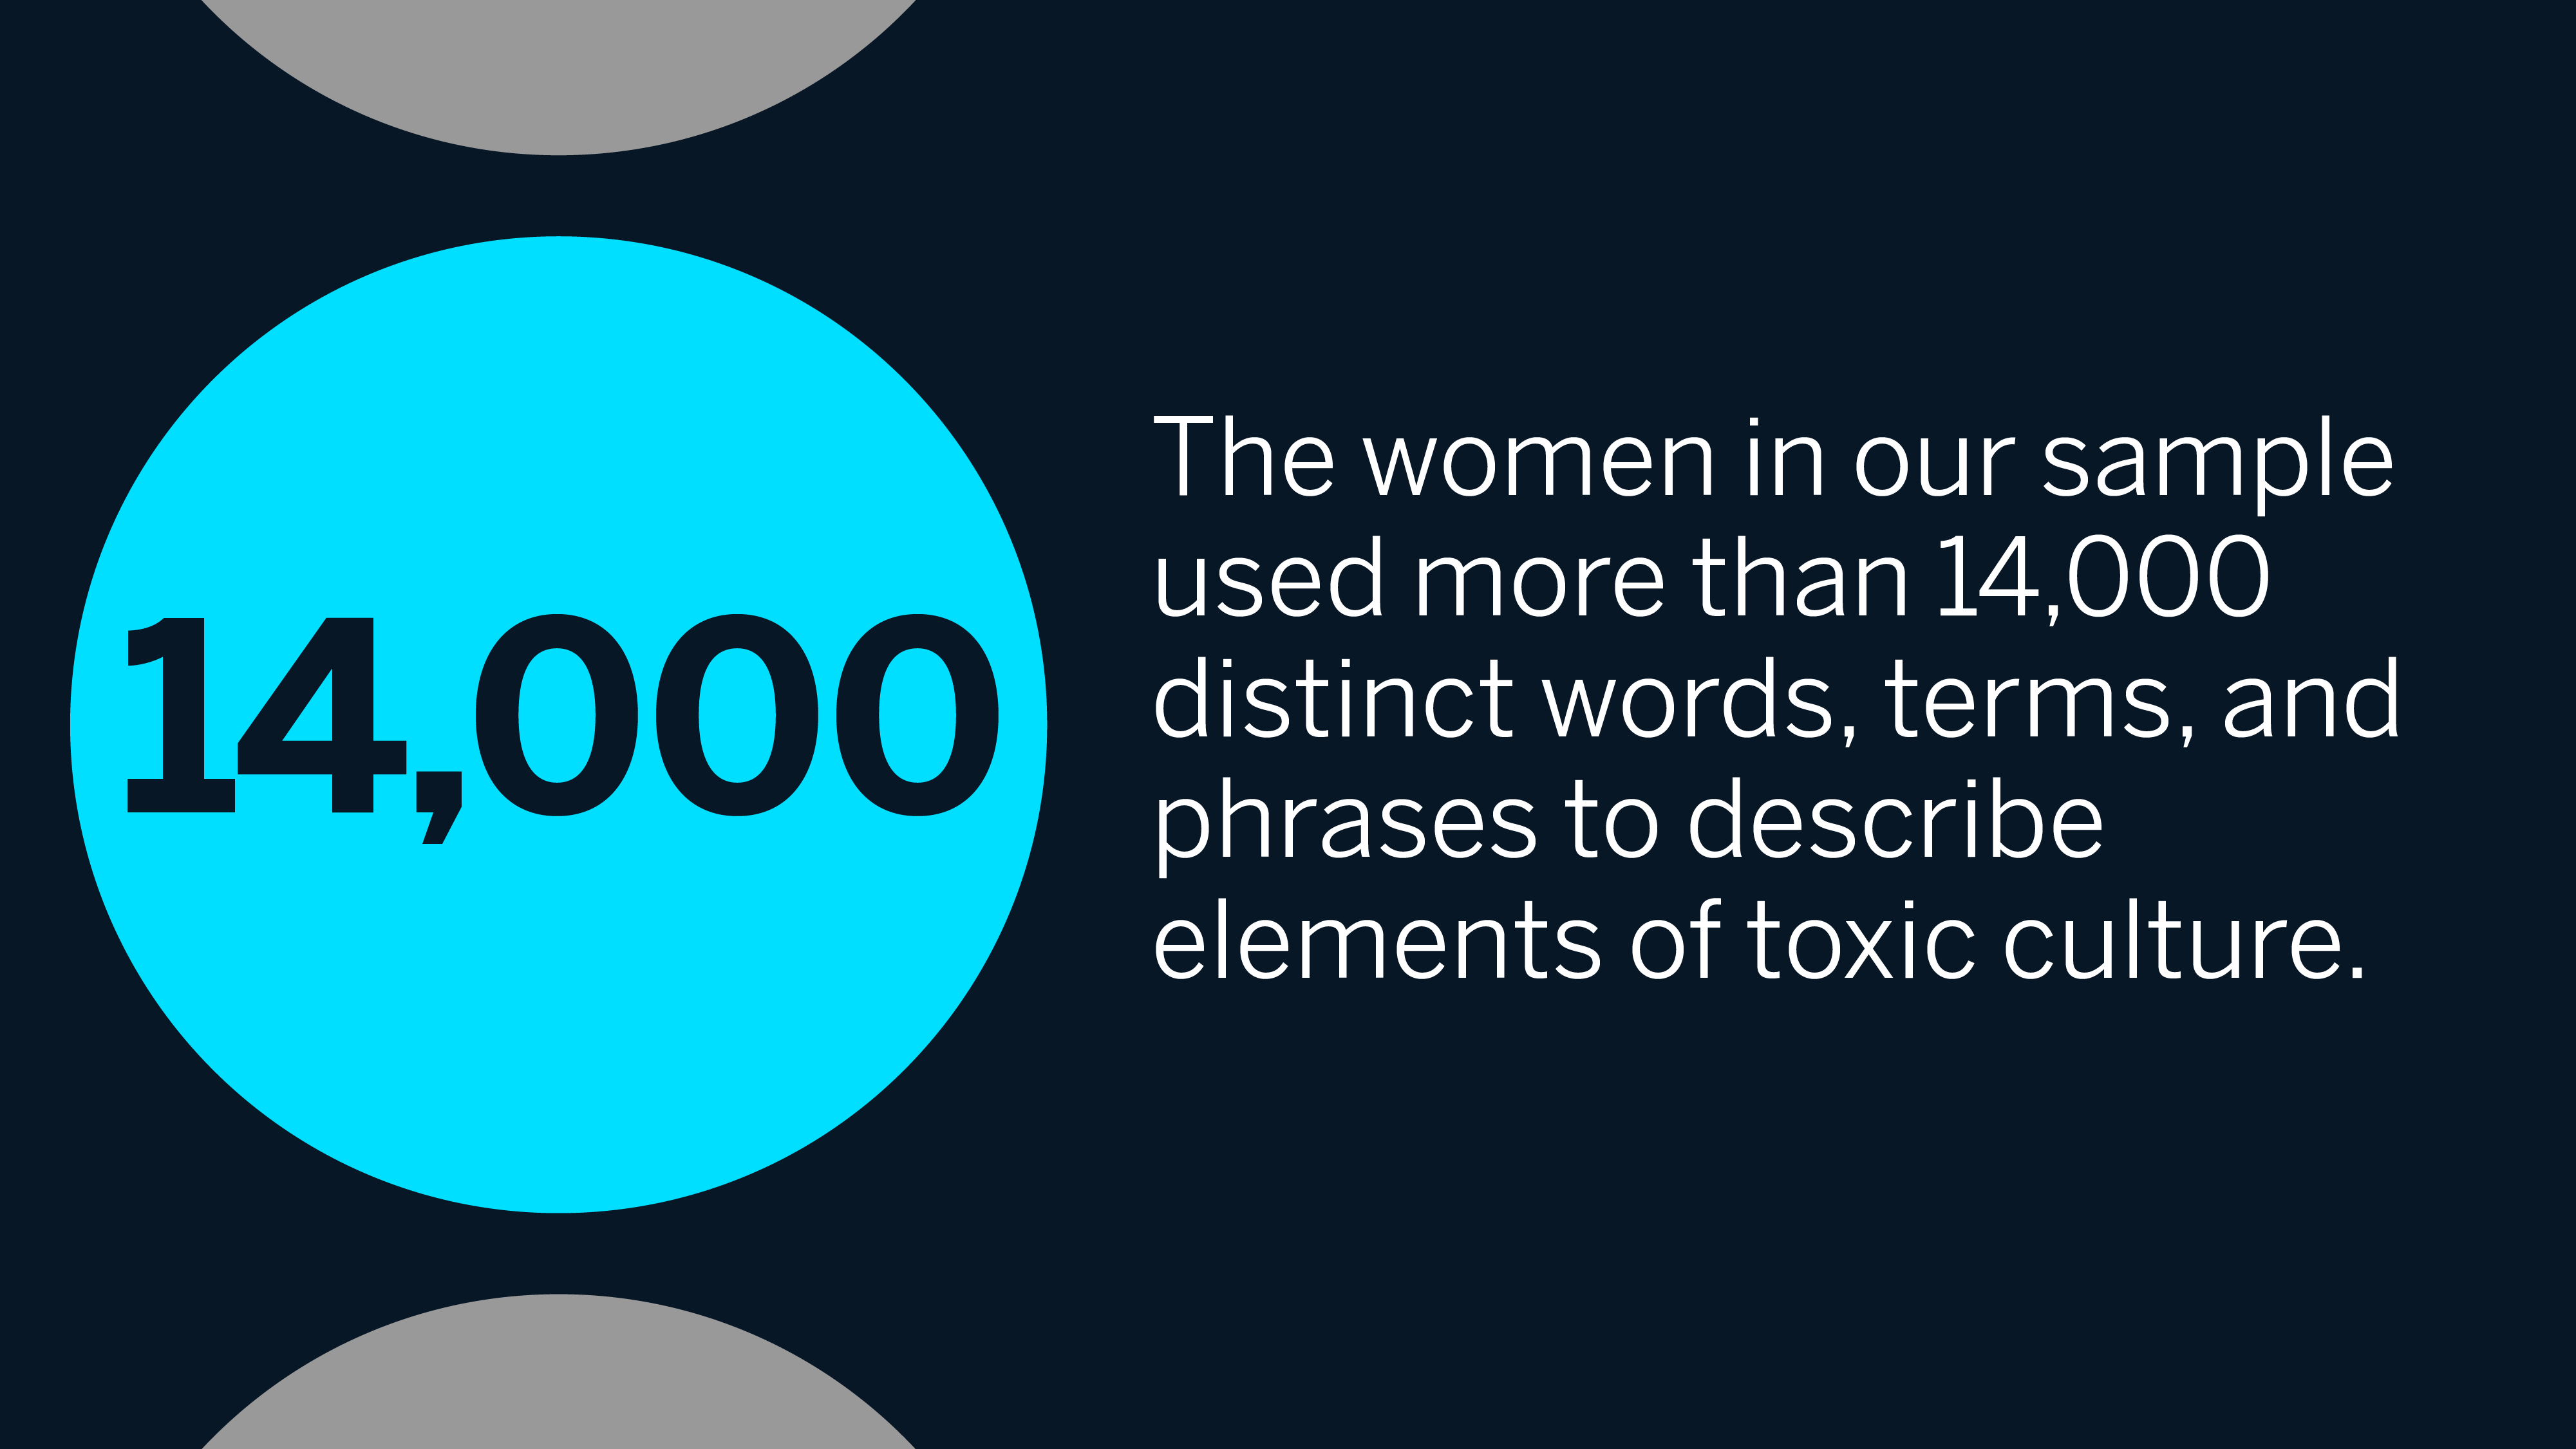 The women in our sample used more than 14,000 distinct words, terms, and phrases to describe elements of toxic culture.